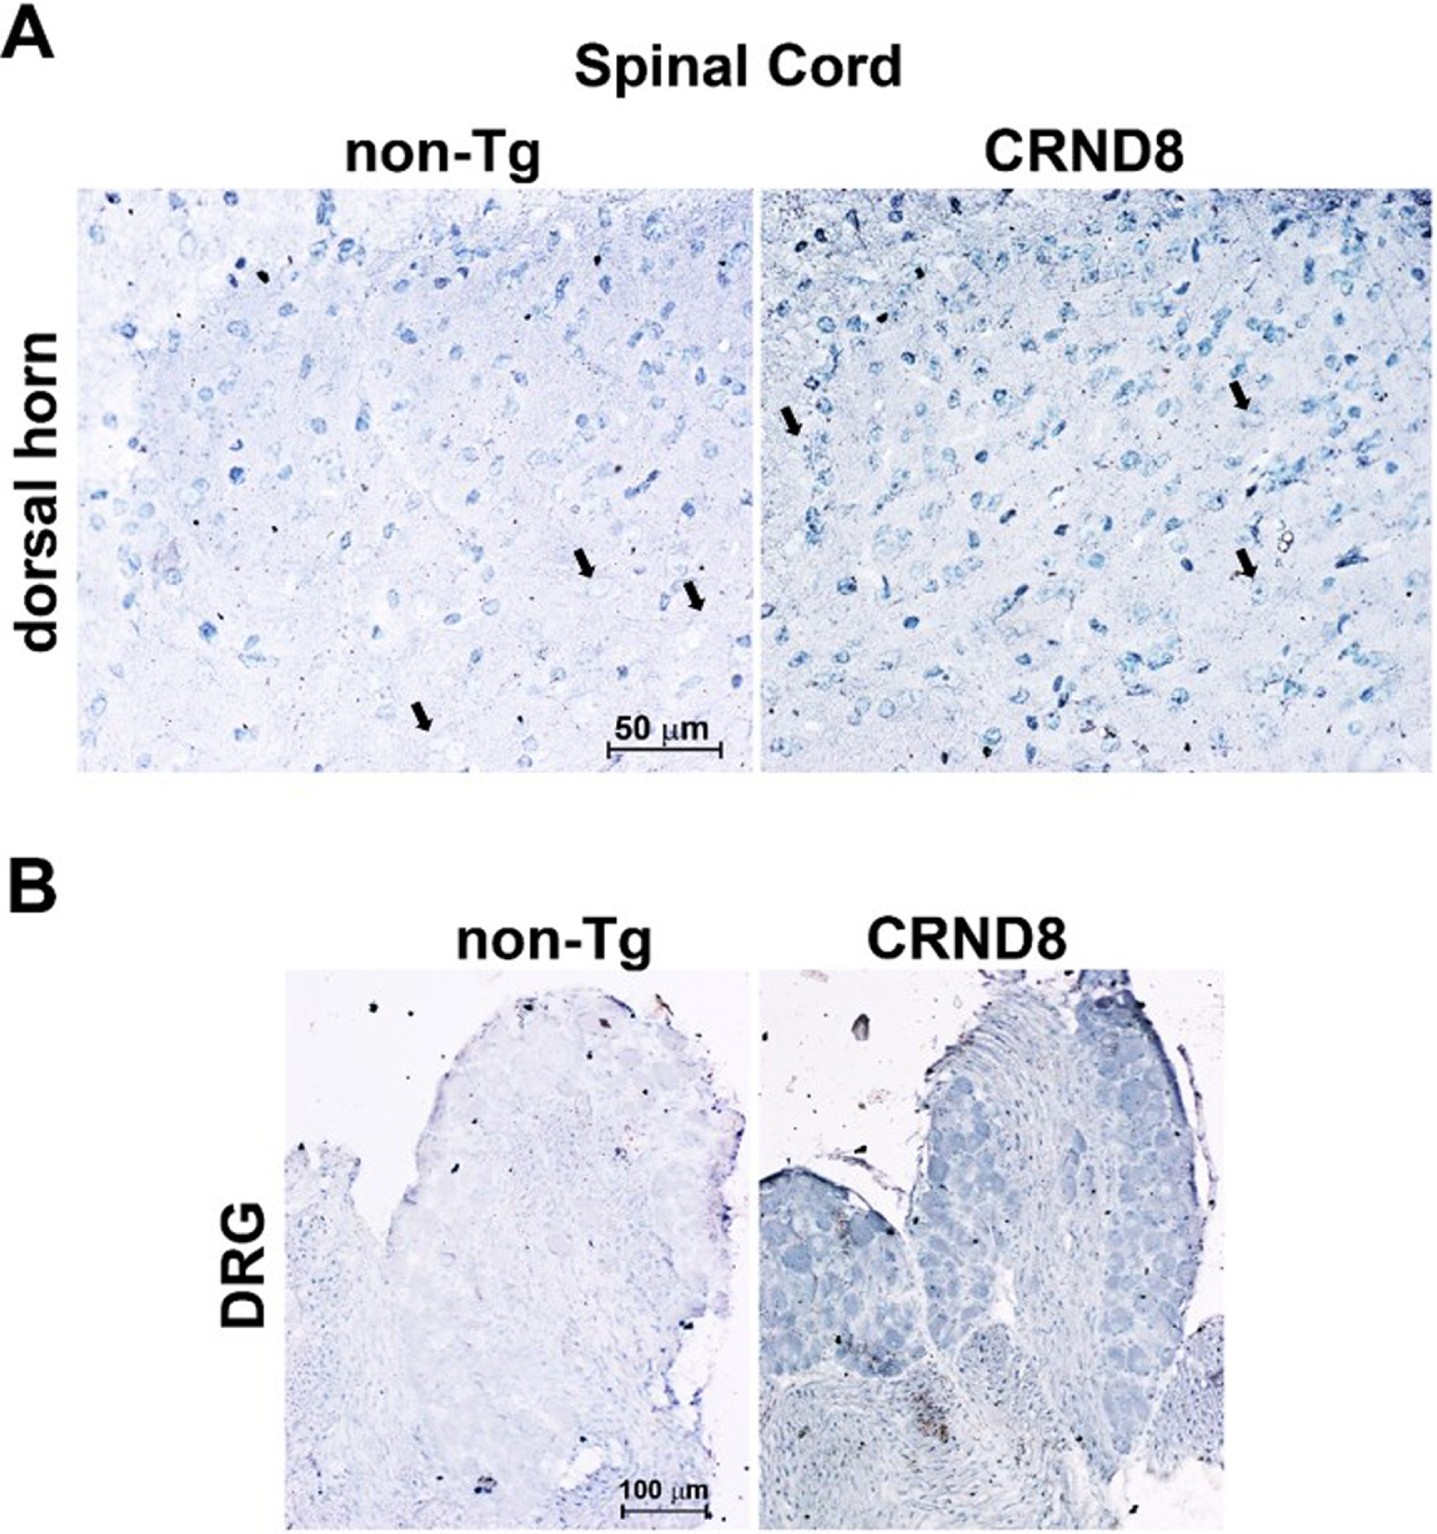 Cellular Aβ40 was visible in the lumbar dorsal horns and in the DRG of CRND8 mice. Representative Aβ40 immunostaining of cell bodies in CRND8 and non-Tg lumbar dorsal horn sections (A). Black arrows indicate large cell bodies that were immunolabeled in CRND8 but not in non-Tg mice (A). In B, representative photomicroscopies of CRND8 and non-Tg DRG sections immunostained for Aβ40. Aβ40 immunostaining was present in CRND8 but not in non-Tg mice.